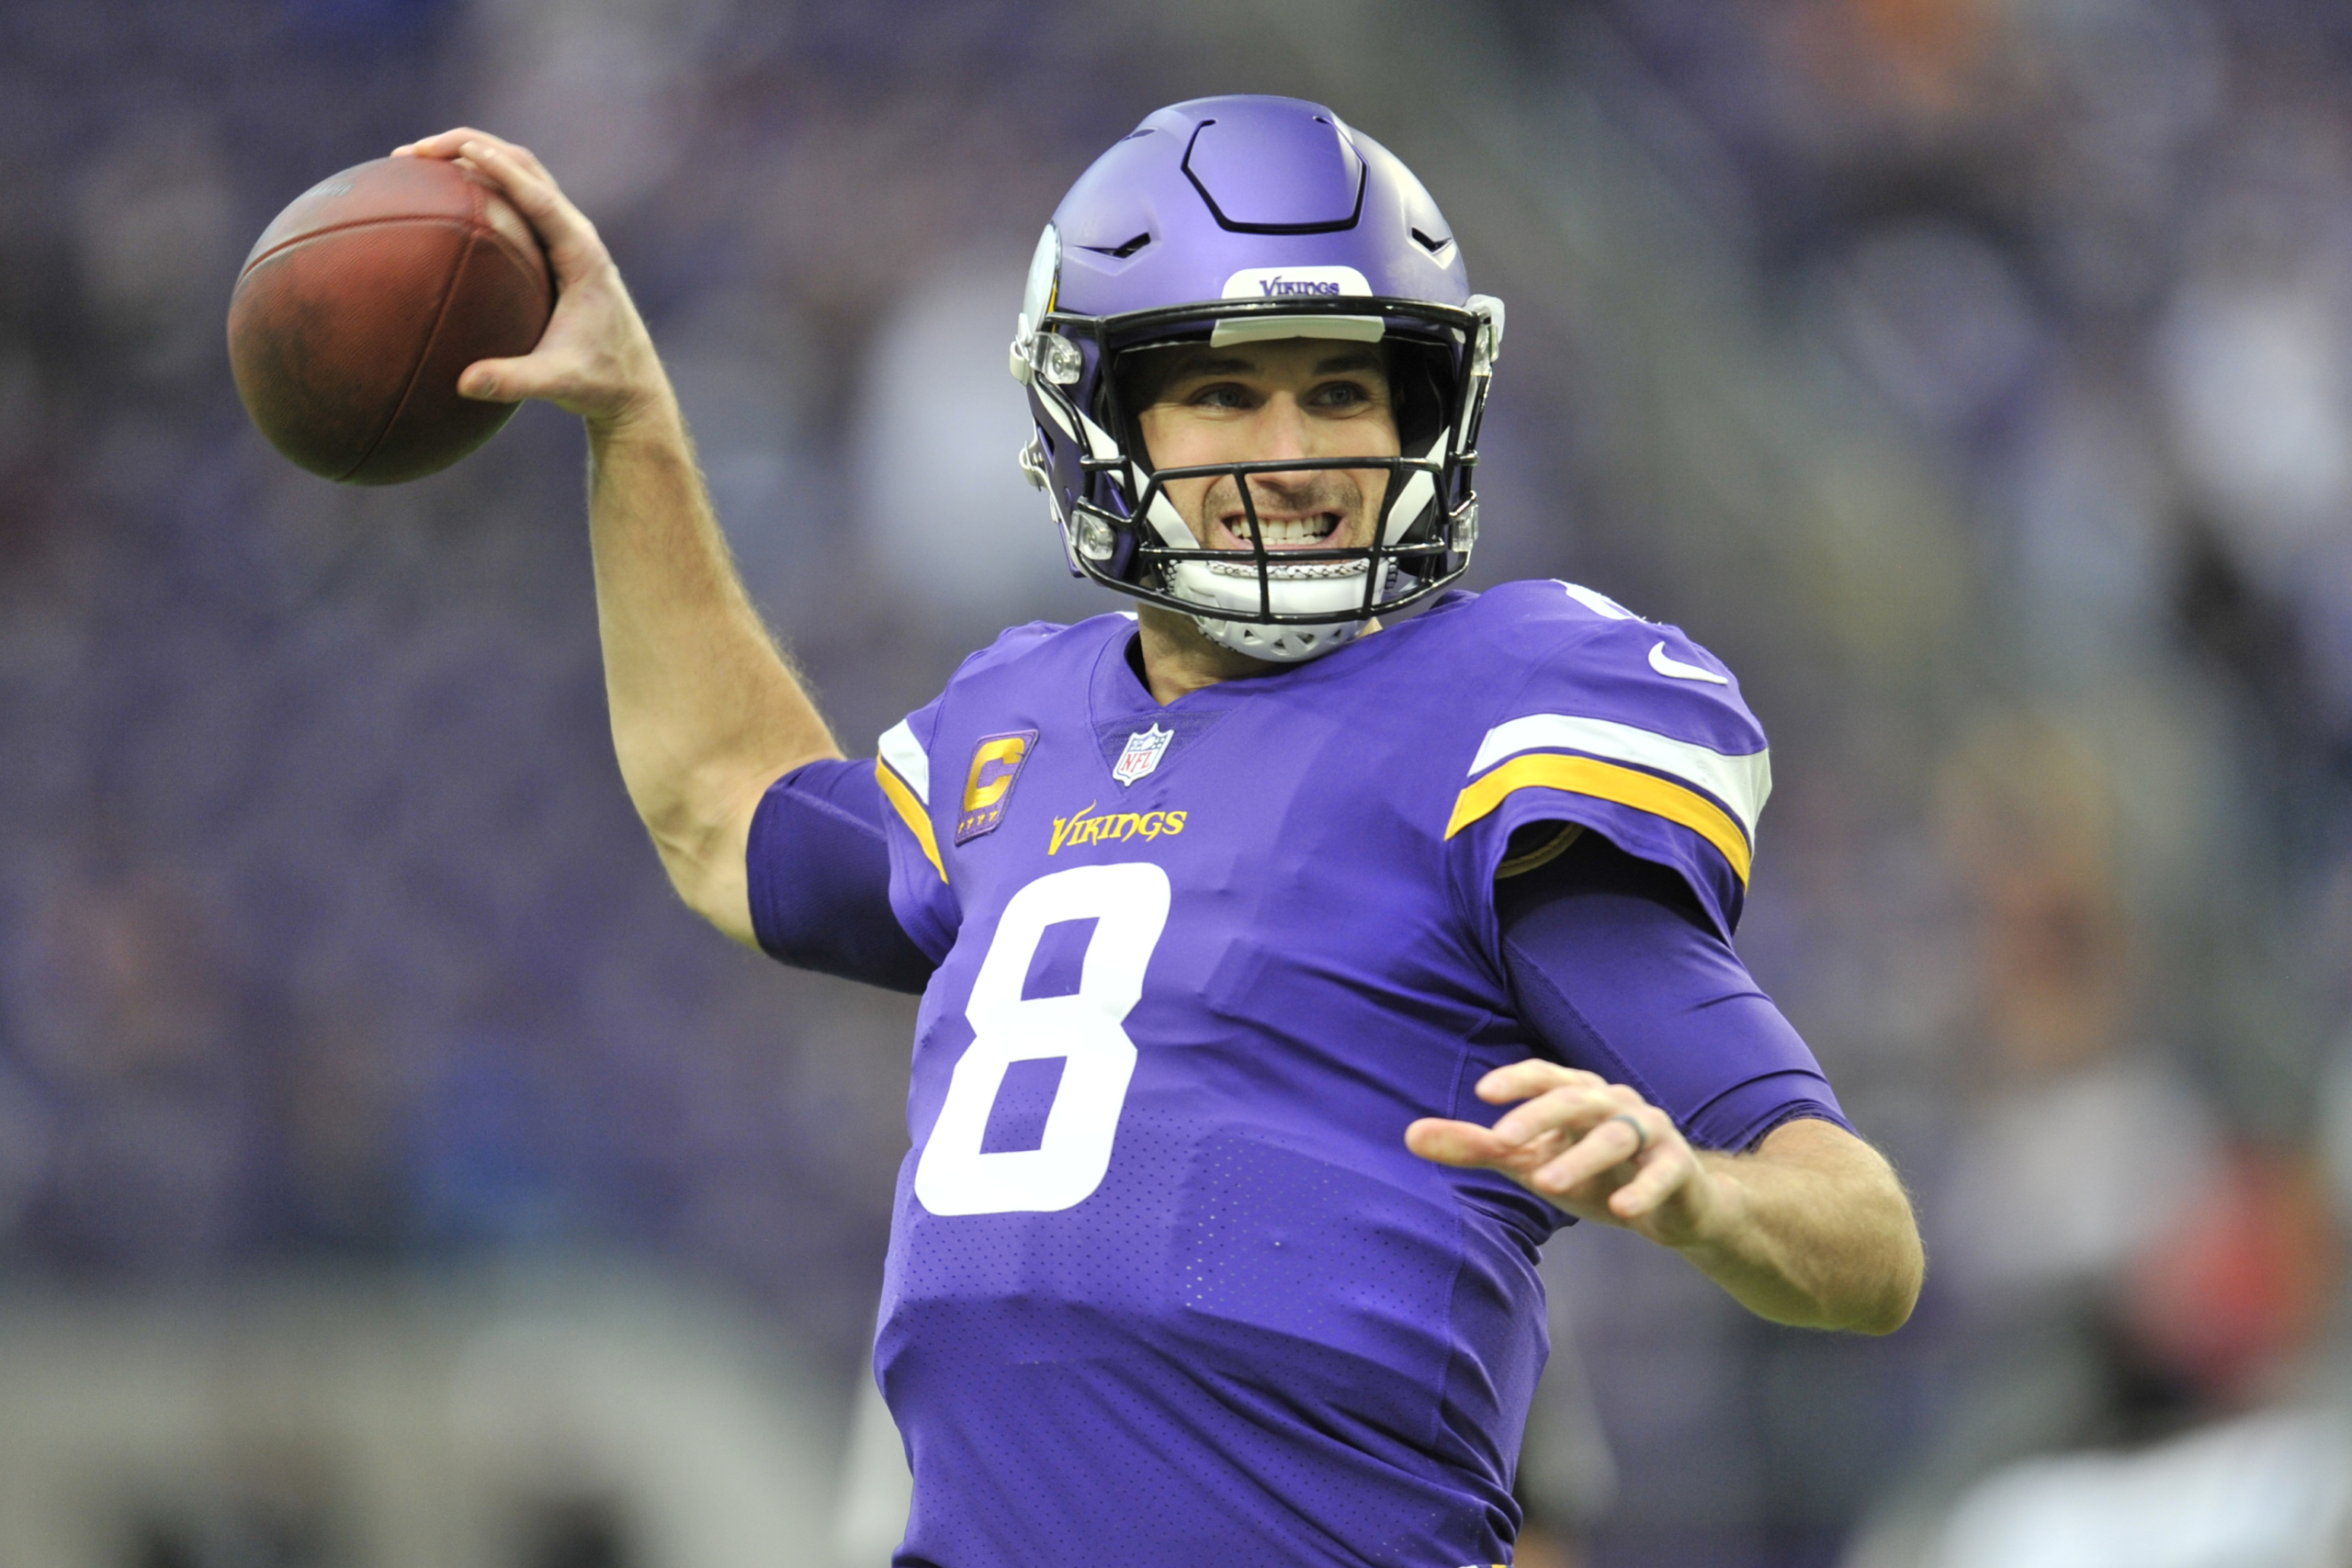 Minnesota Vikings complete largest comeback in NFL history, win 39-36